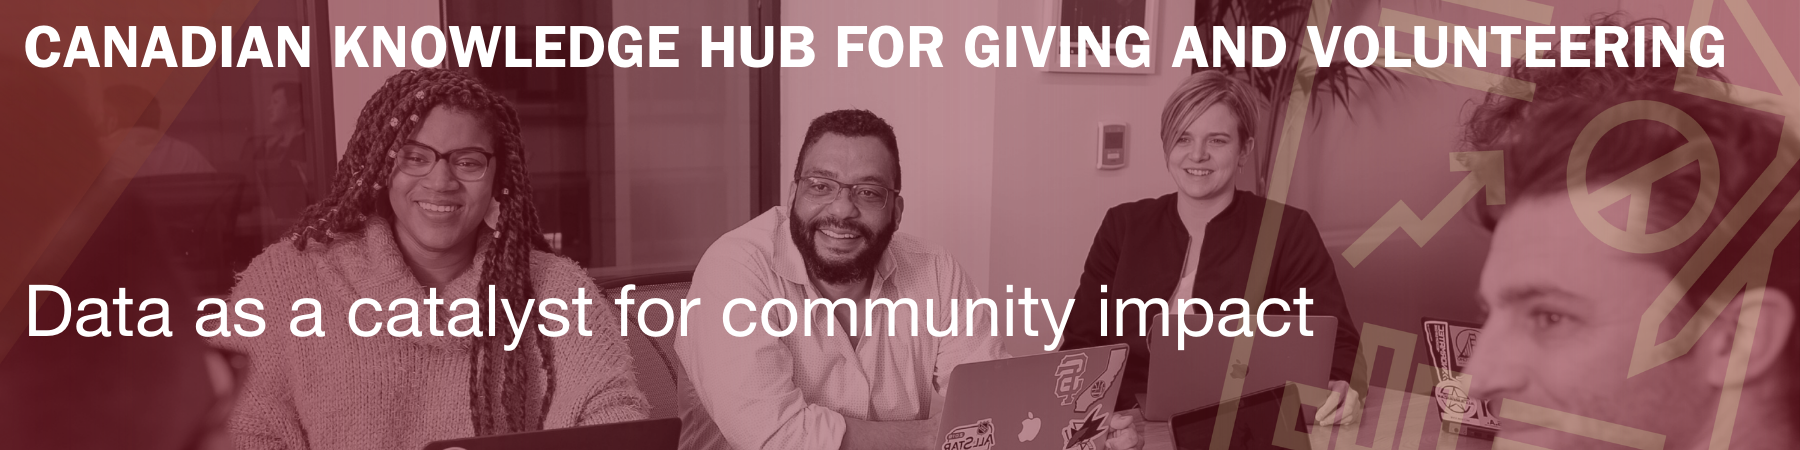 Visit the Canadian Knowledge Hub for Giving and Volunteering